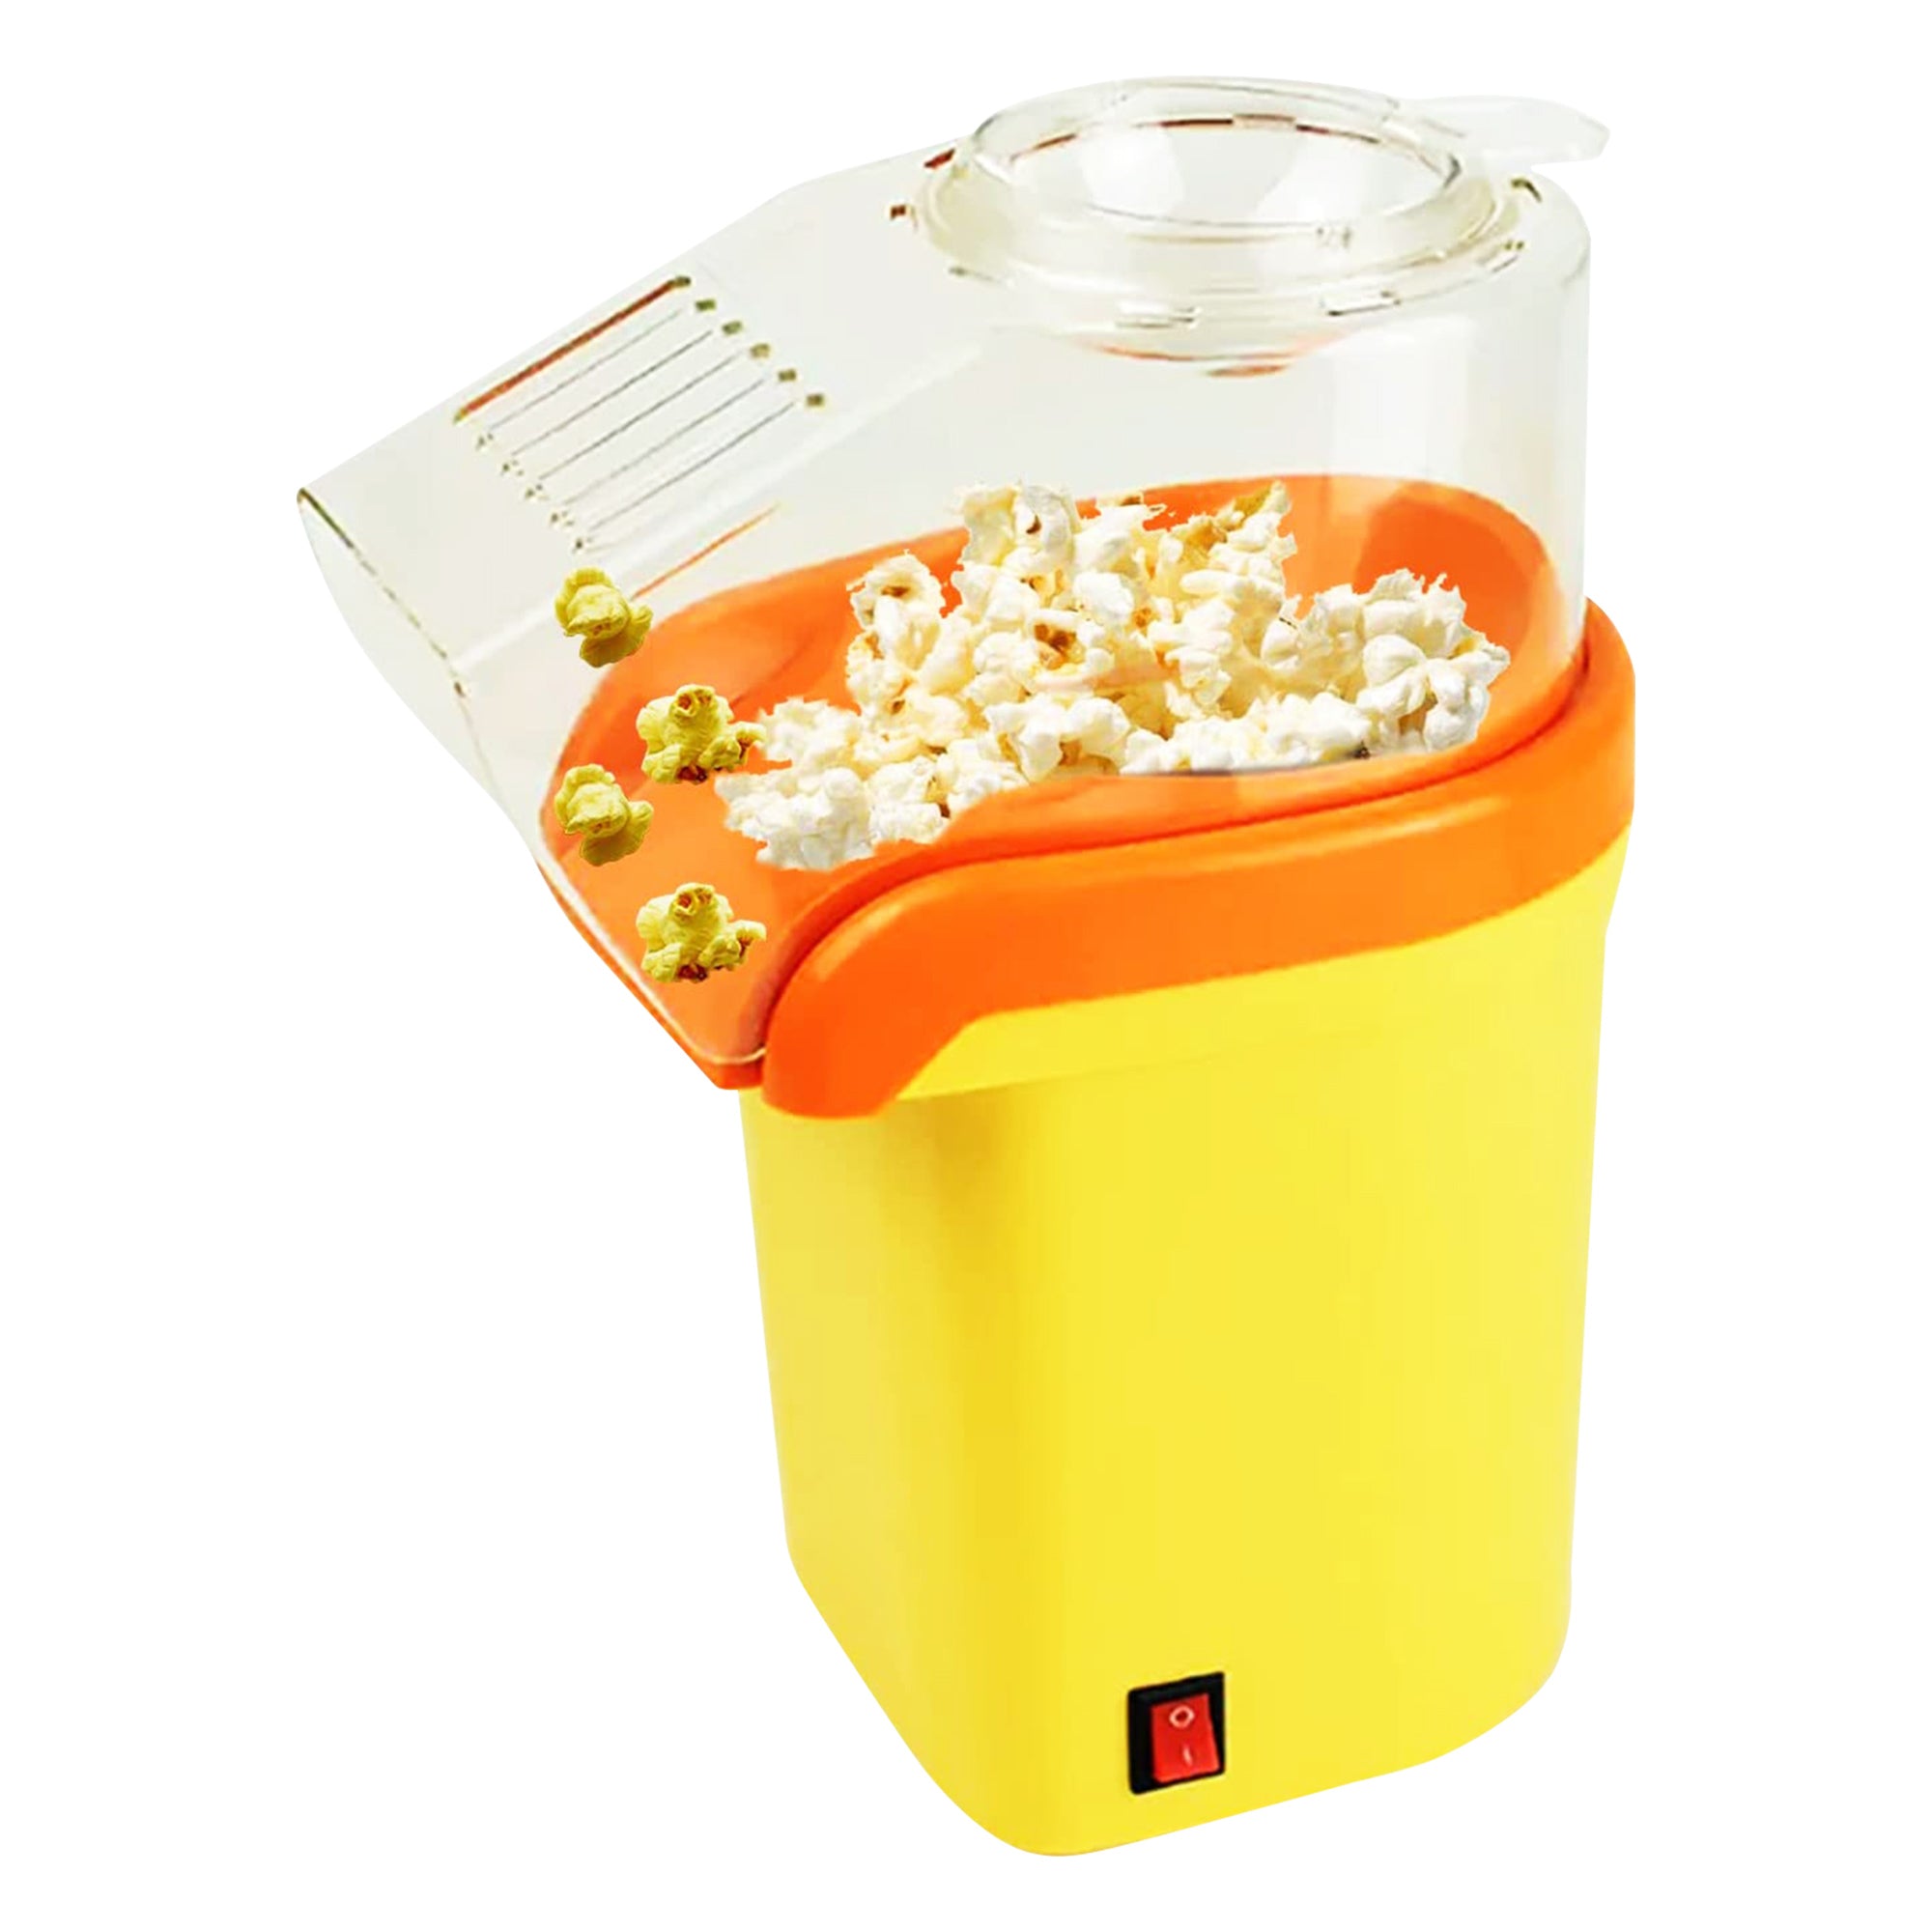 5Core Hot Air Popcorn Machine, 16 Cup, Electric Oil-Free Pop Corn Kernel Popper BPA-Free Food Safe Yellow